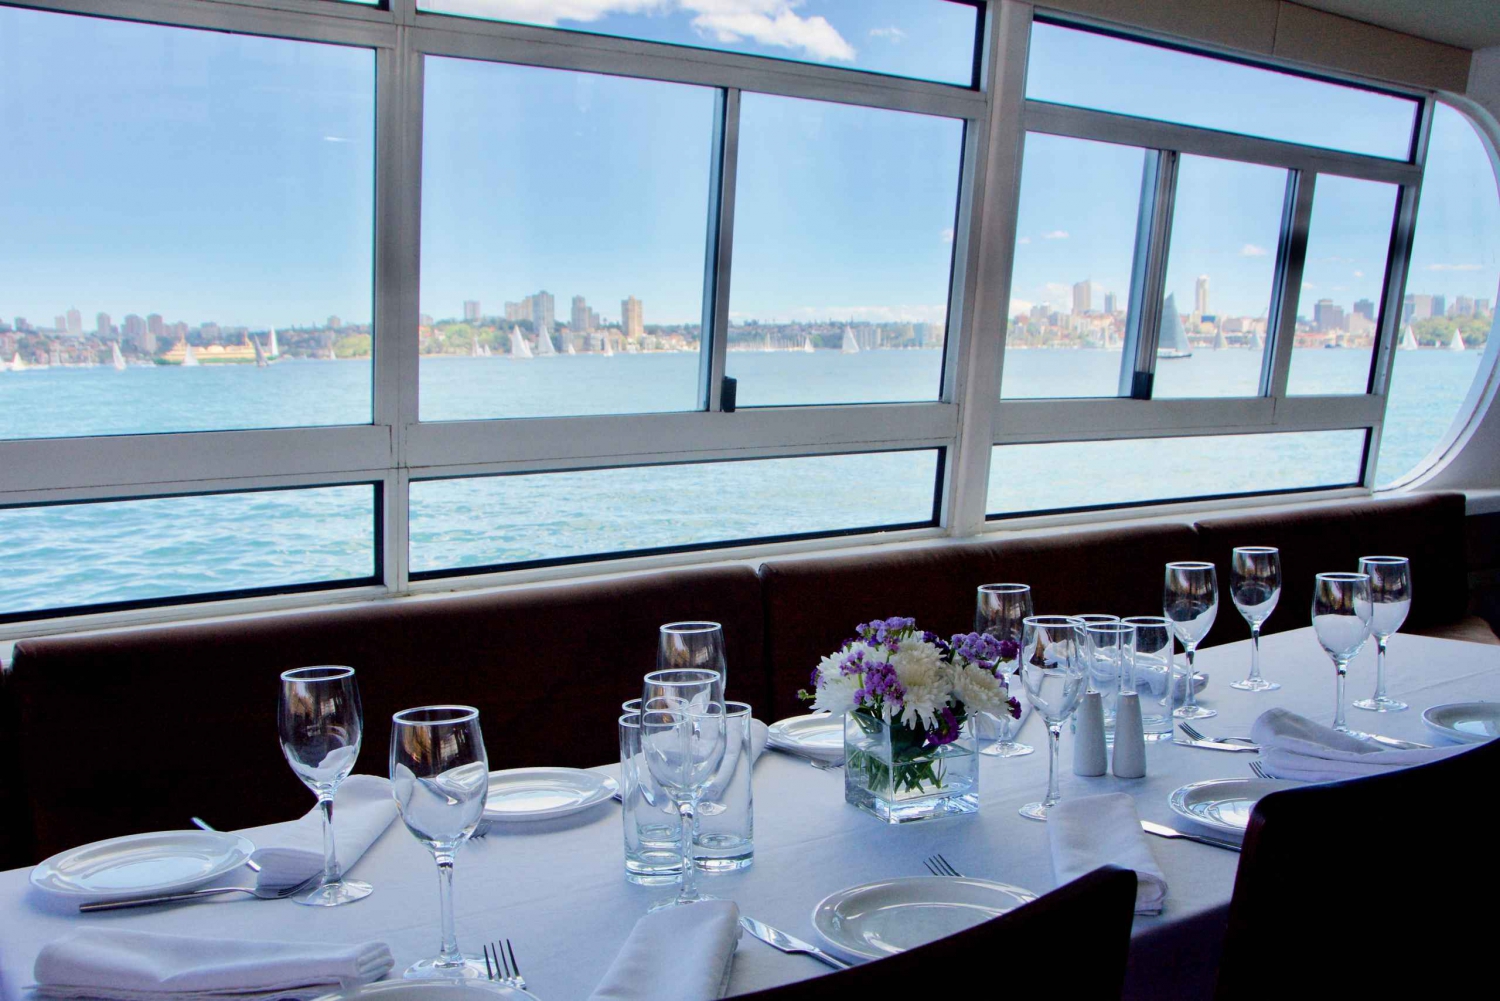 Sydney: Harbor Cruise with Gourmet Lunch and Beverages